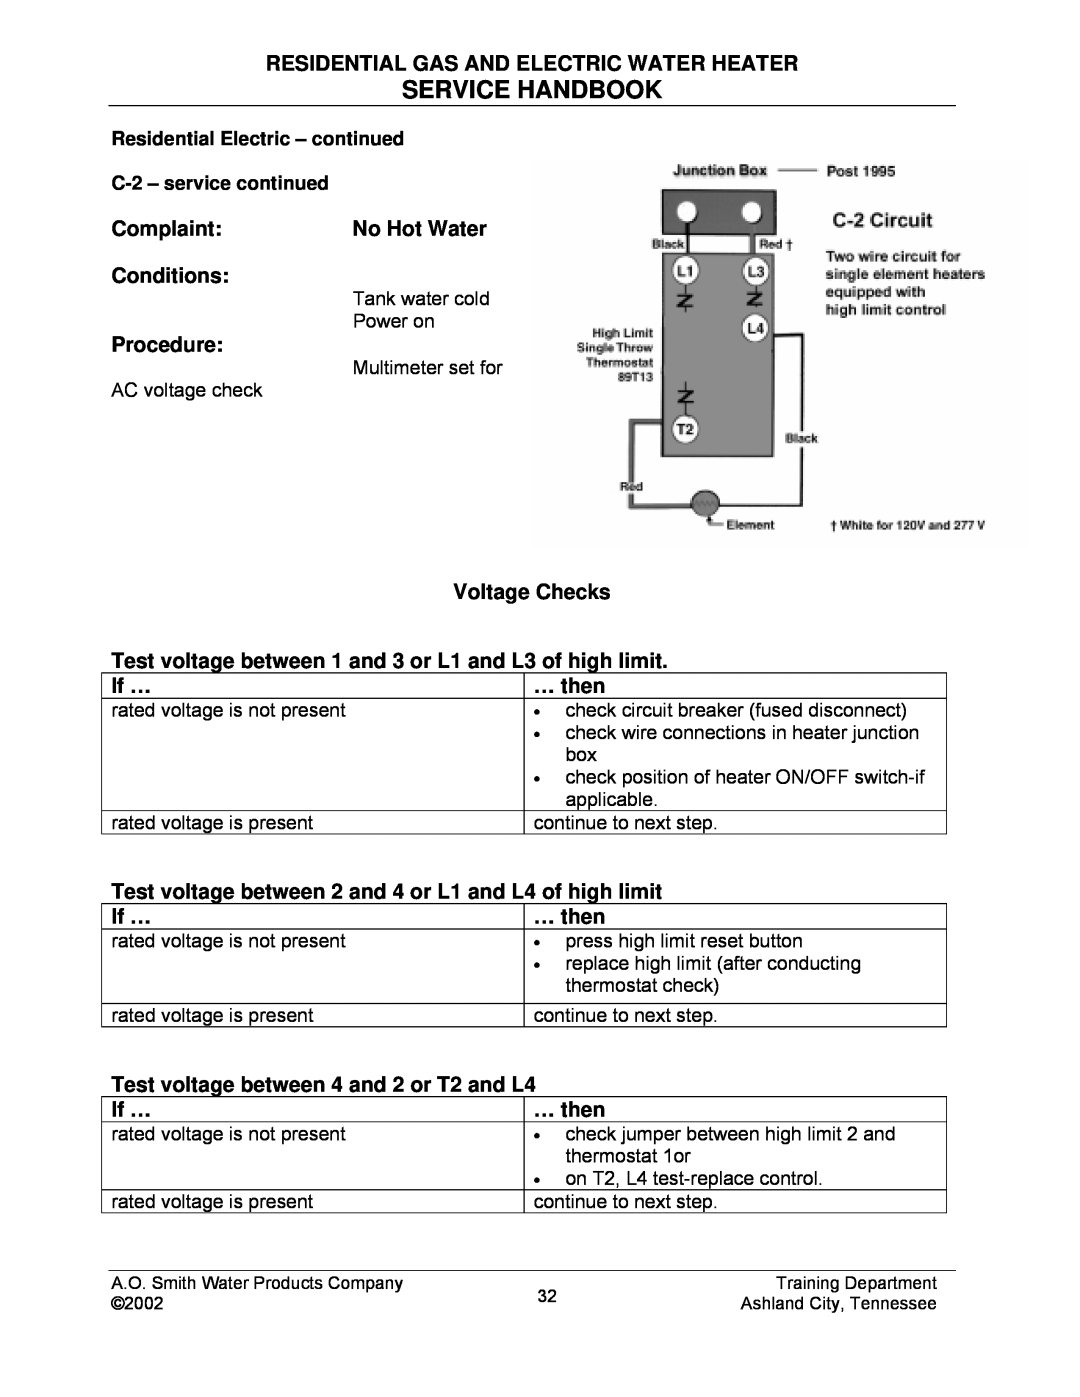 A.O. Smith TC-049-R2 Service Handbook, Residential Gas And Electric Water Heater, Complaint, No Hot Water, Conditions 